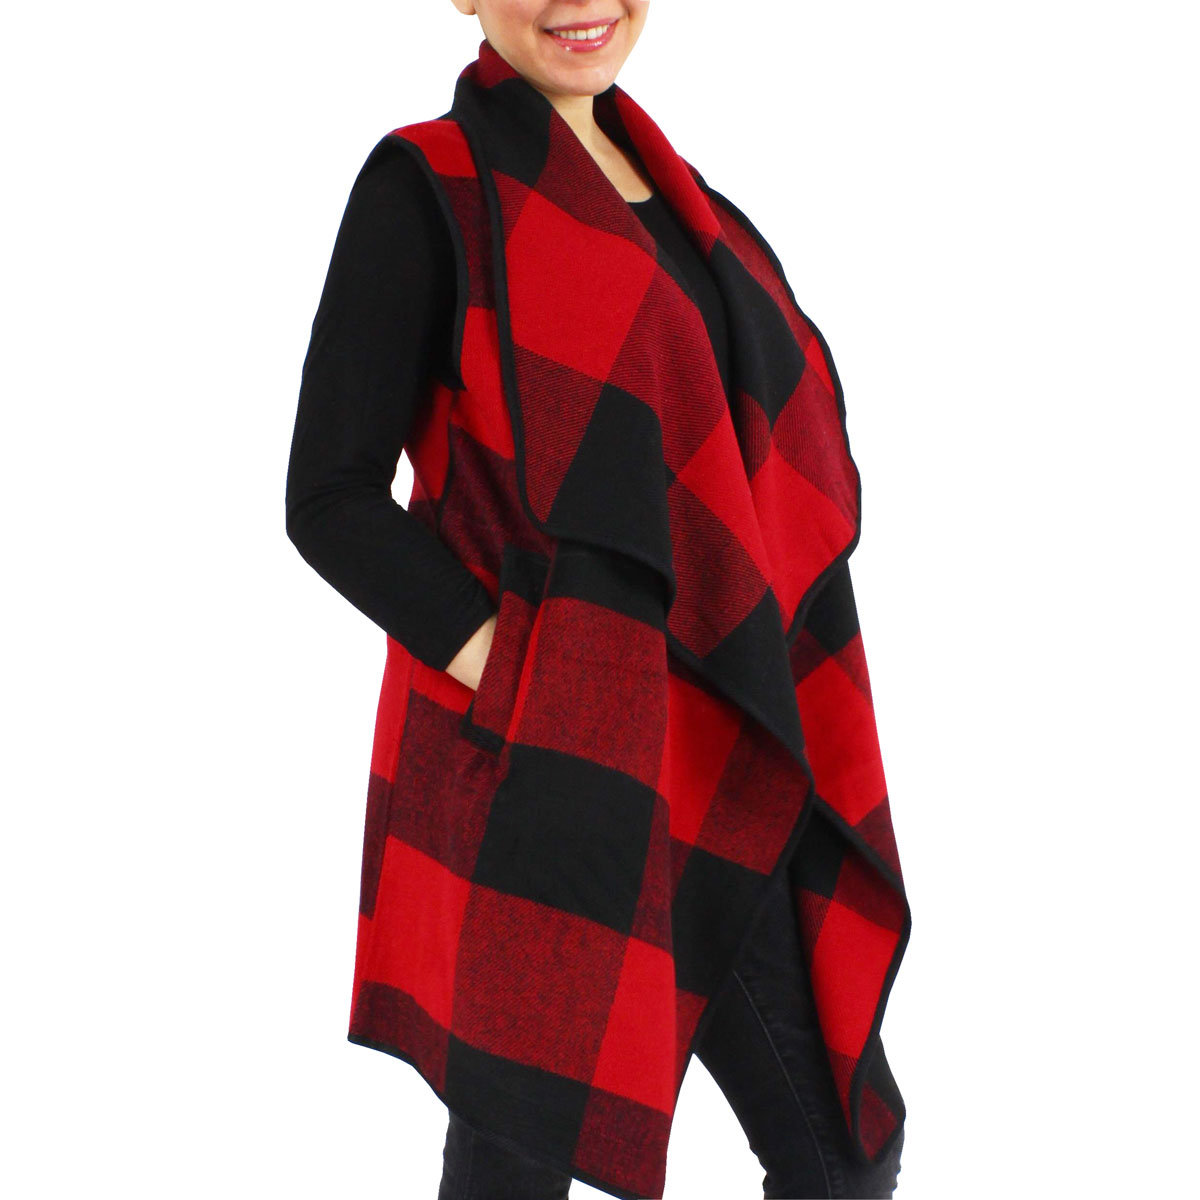 Matching Pieces for Autumn and Winter 3178 3306 BUFFALO PLAID RED/BLACK with Black Buttons - One Size Fits All